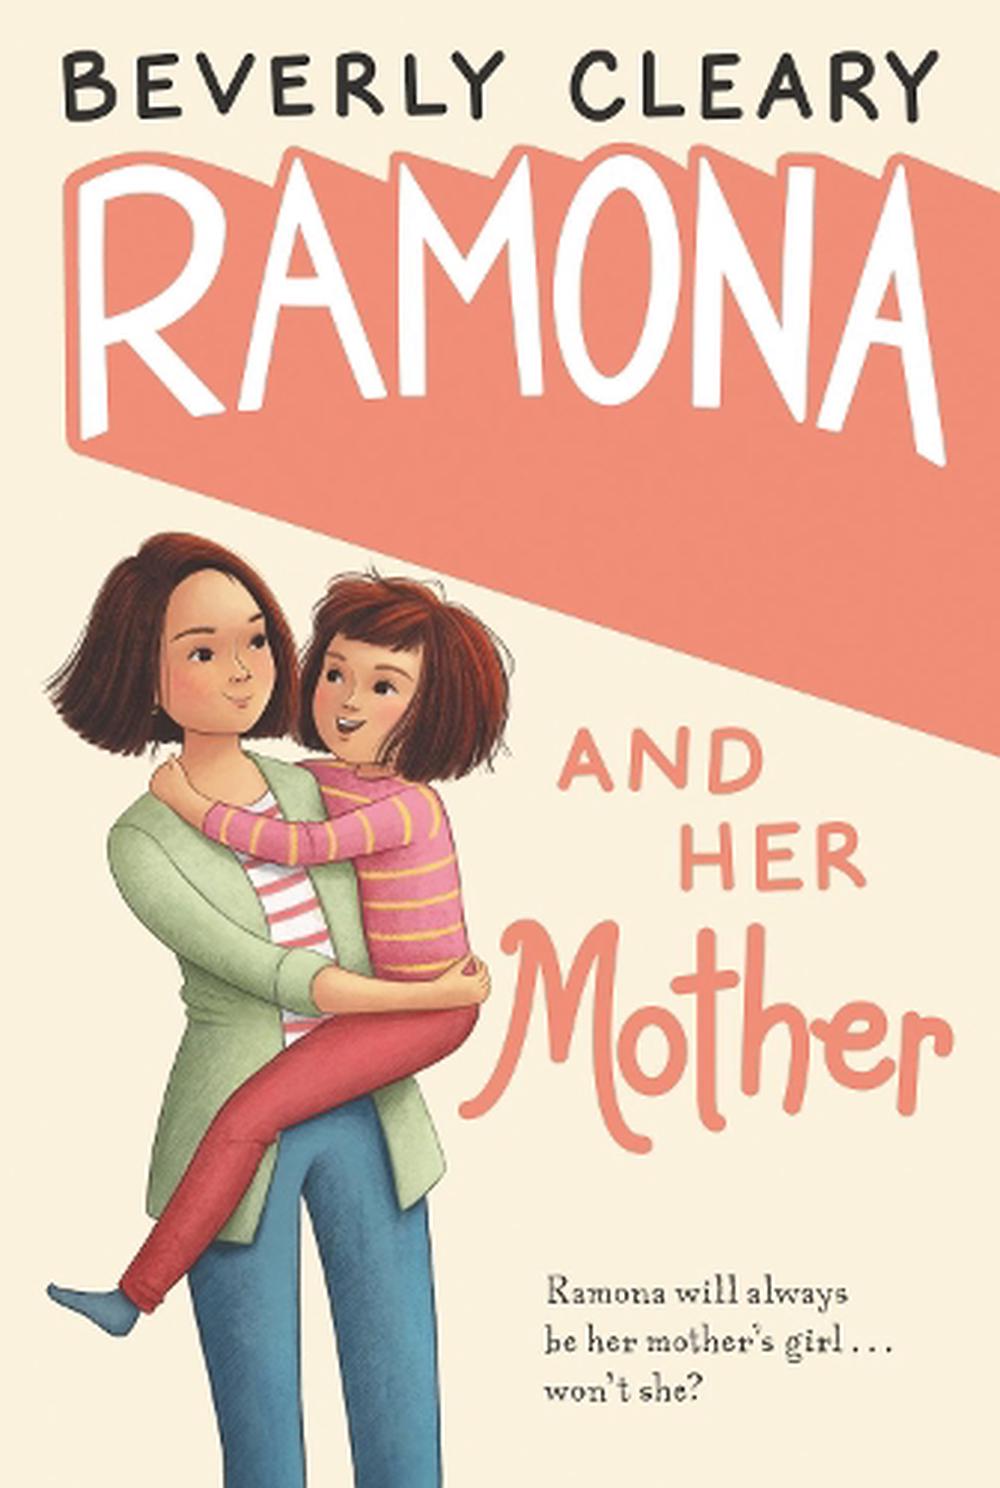 other books by the author of beezus and ramona